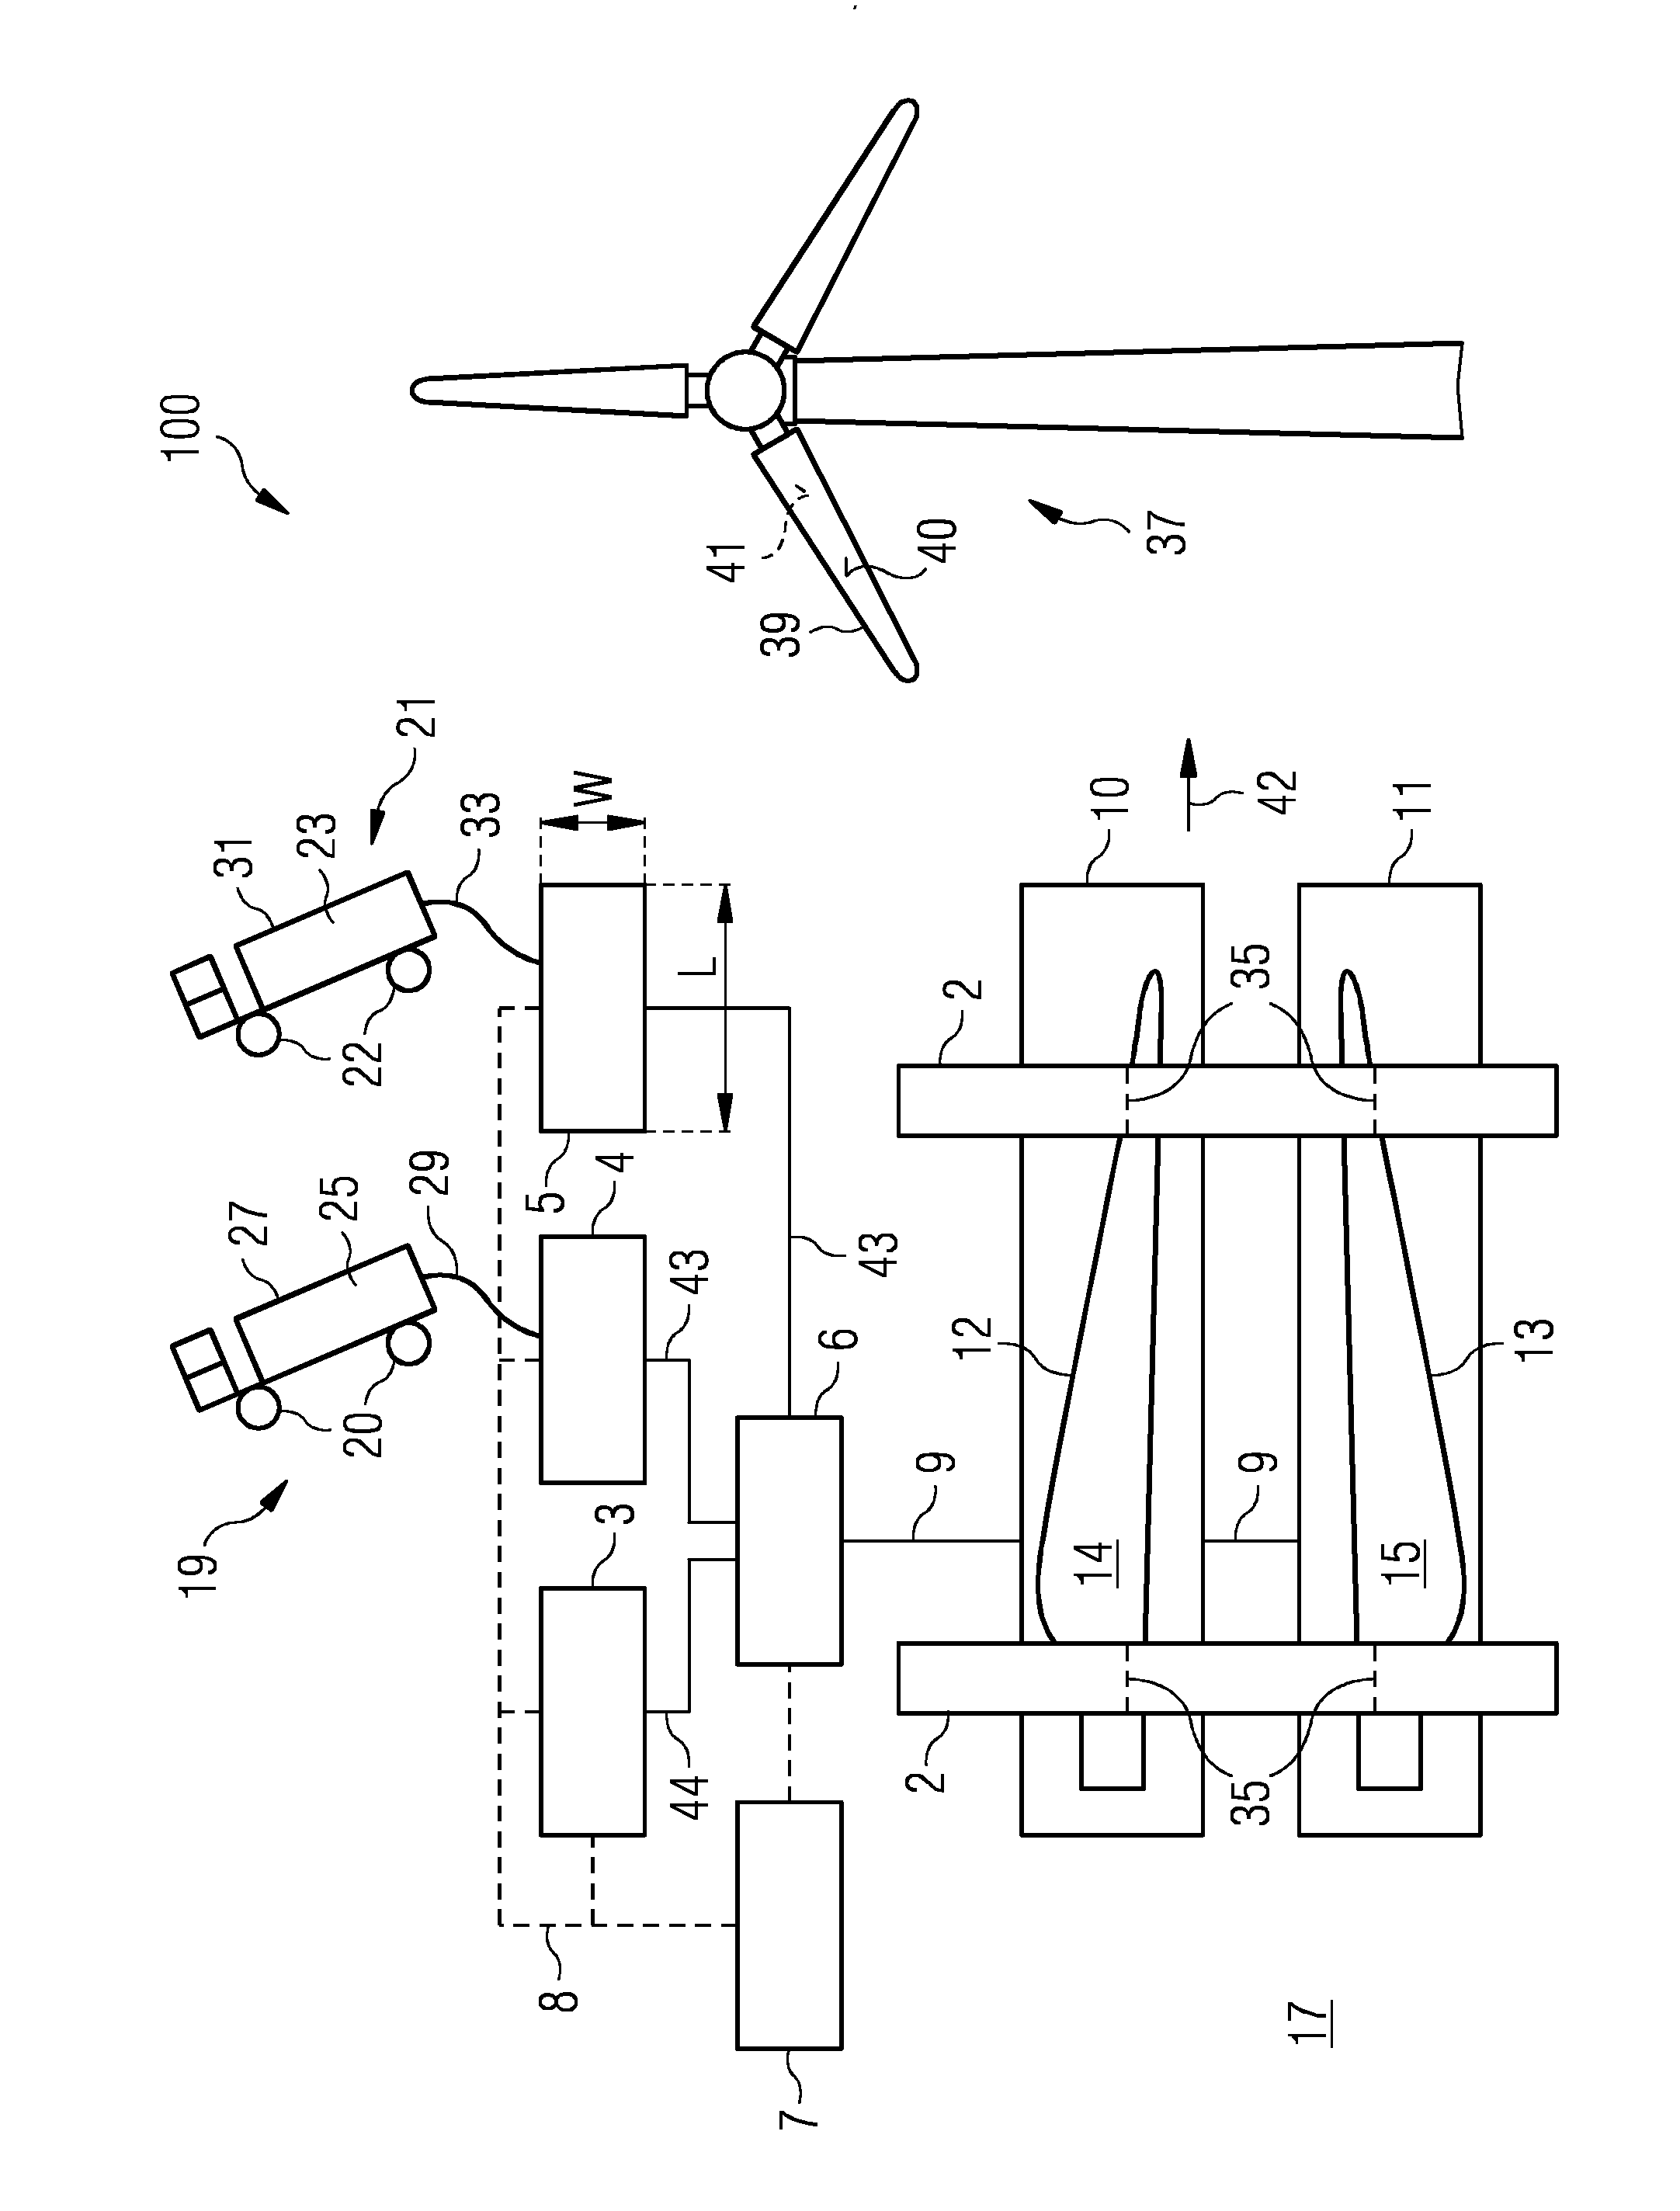 Facility and method for manufacturing a rotor blade of a wind turbine and method for setting up the facility